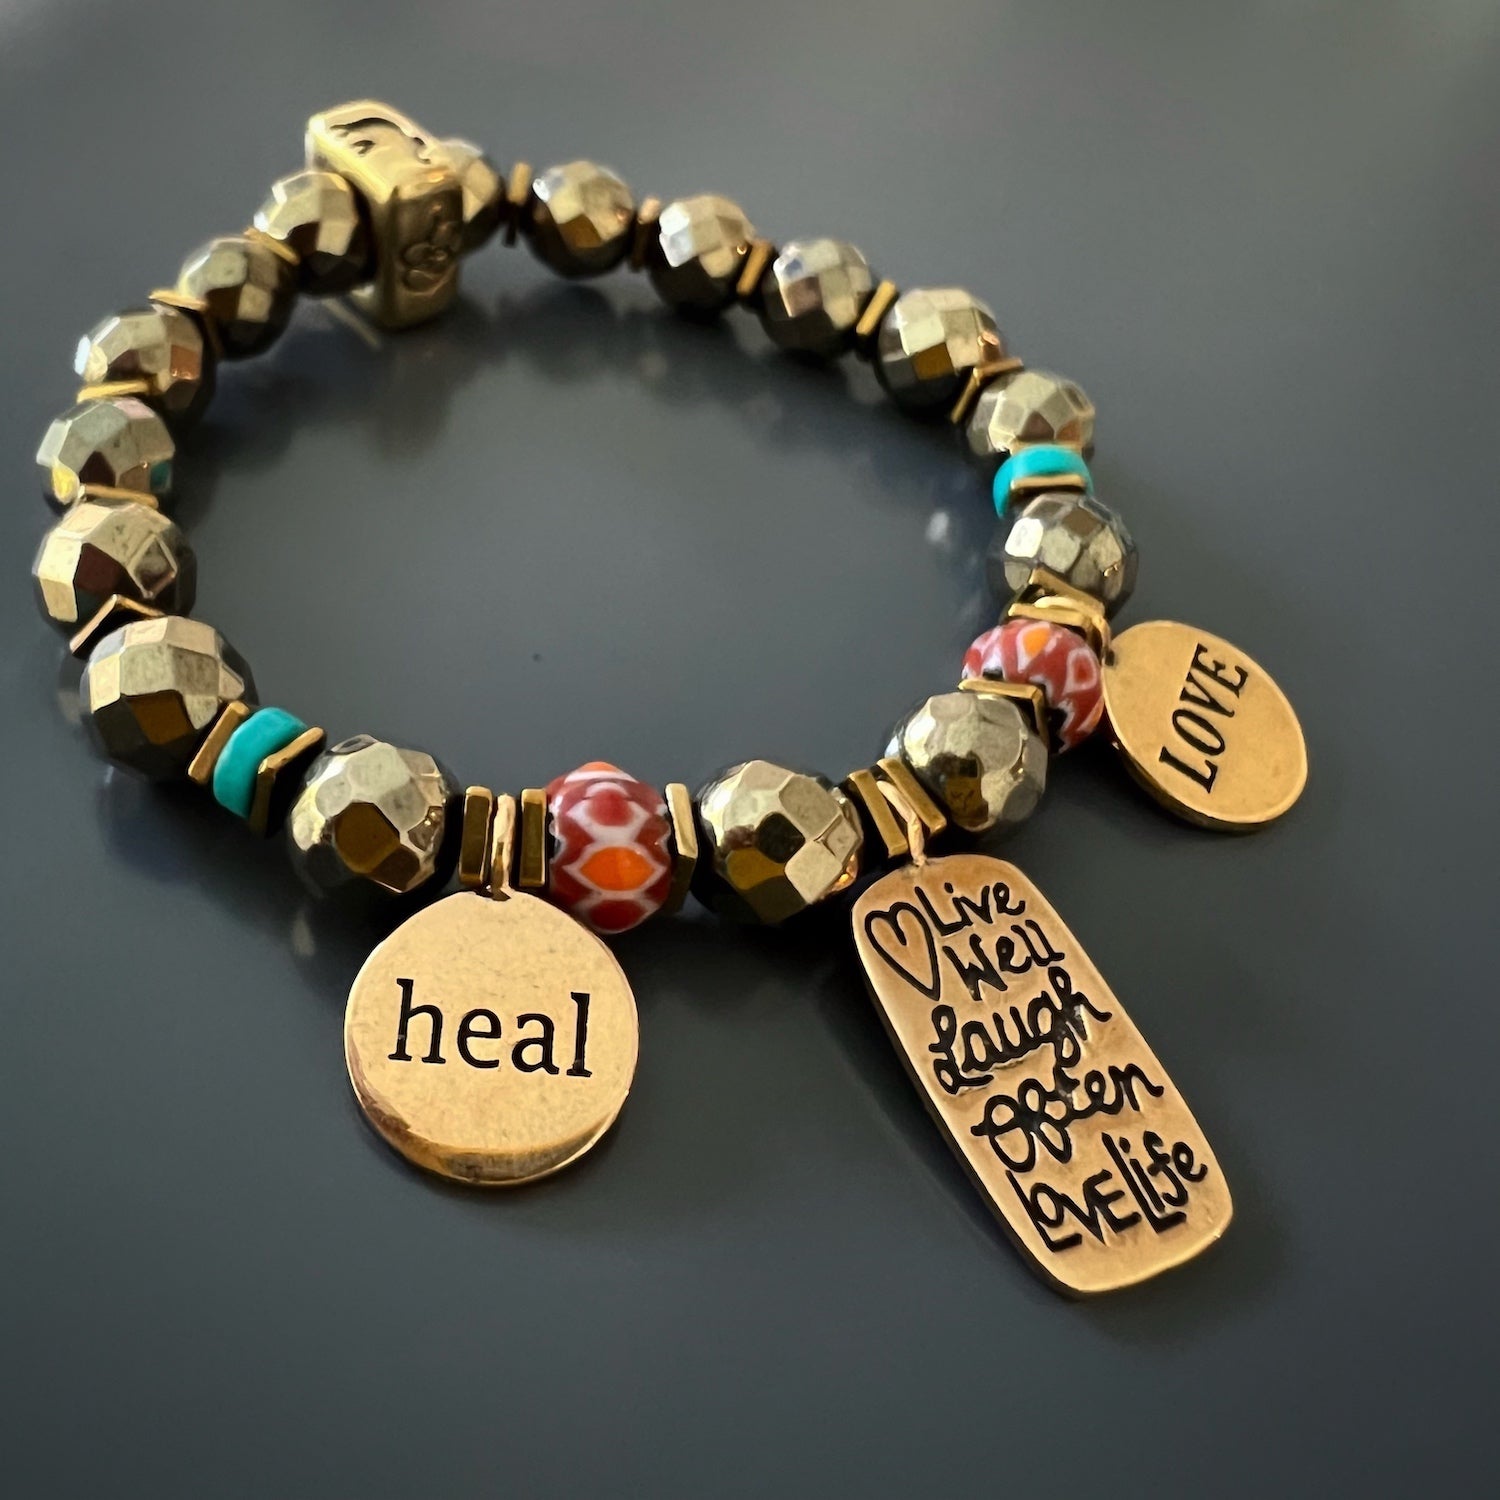 Feel the positive energy of the "Love Your Life" Bracelet, adorned with gold hematite beads and bronze charms with empowering messages.